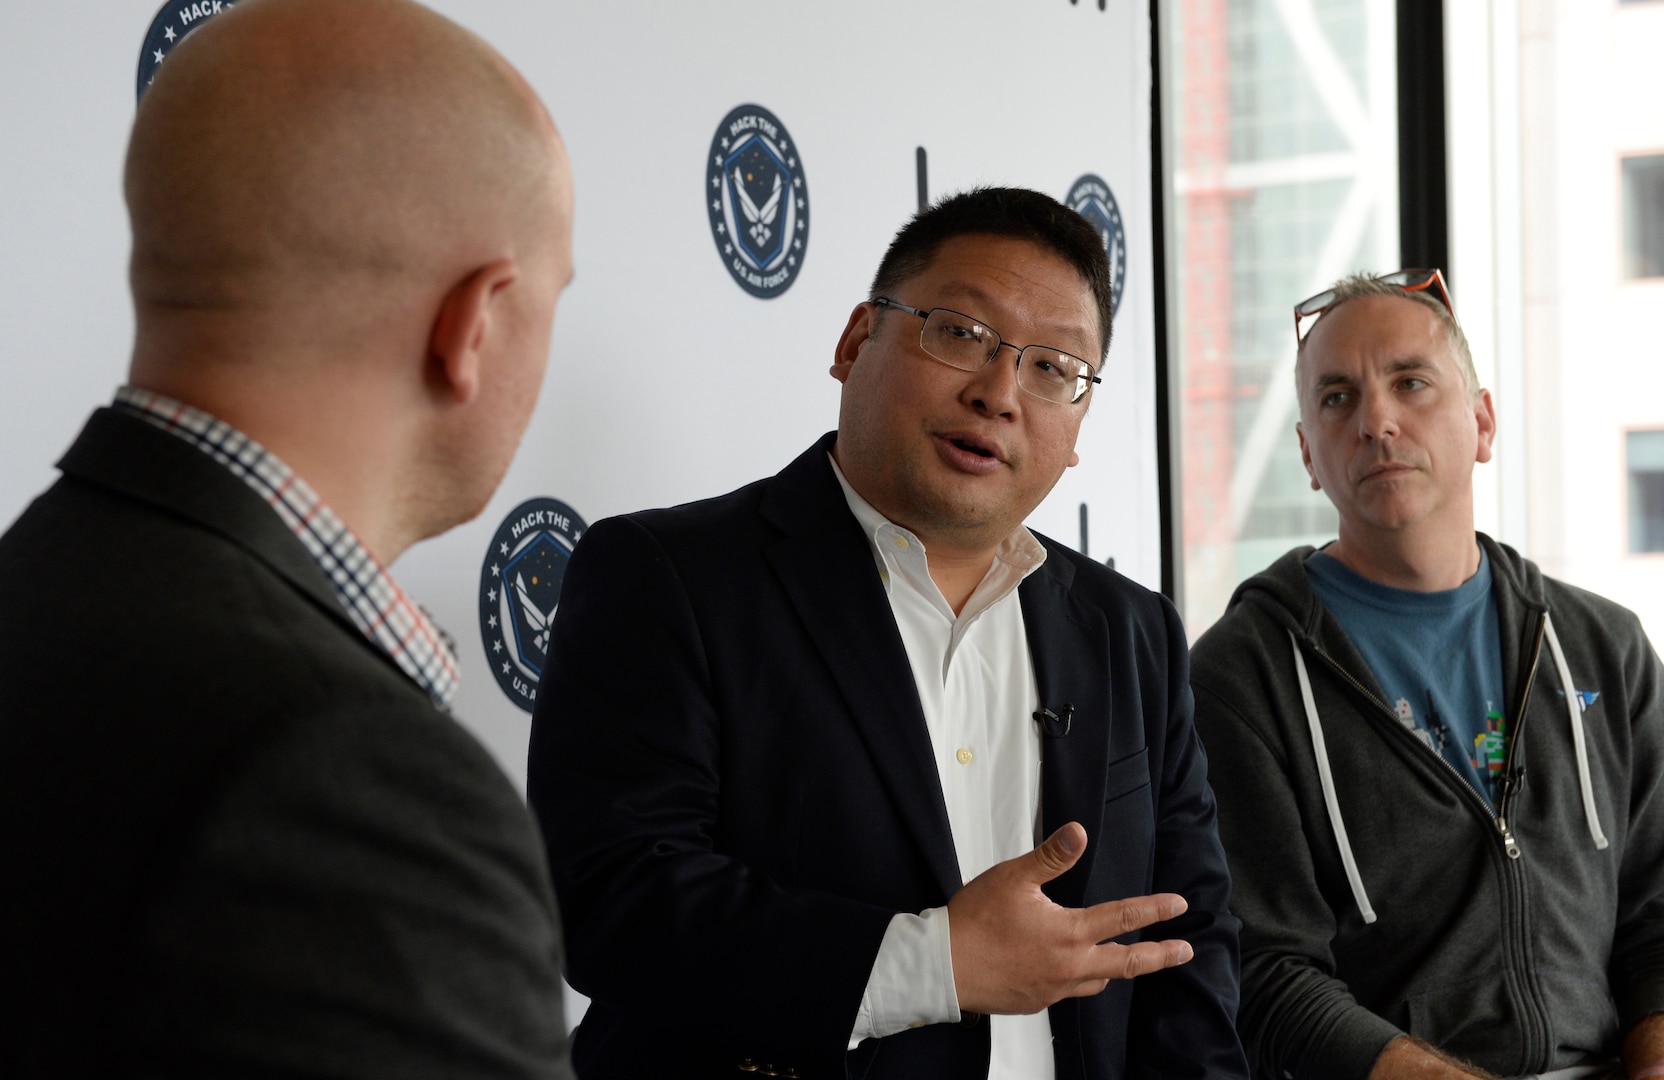 (From left) Alex Rice, chief technology officer and co-founder of HackerOne, Peter Kim, Air Force chief information security officer, and Chris Lynch, director of Defense Digital Service, announce “Hack the Air Force” event at HackerOne headquarters, San Francisco, April 26, 2017 (U.S. Air Force/Dan DeCook)